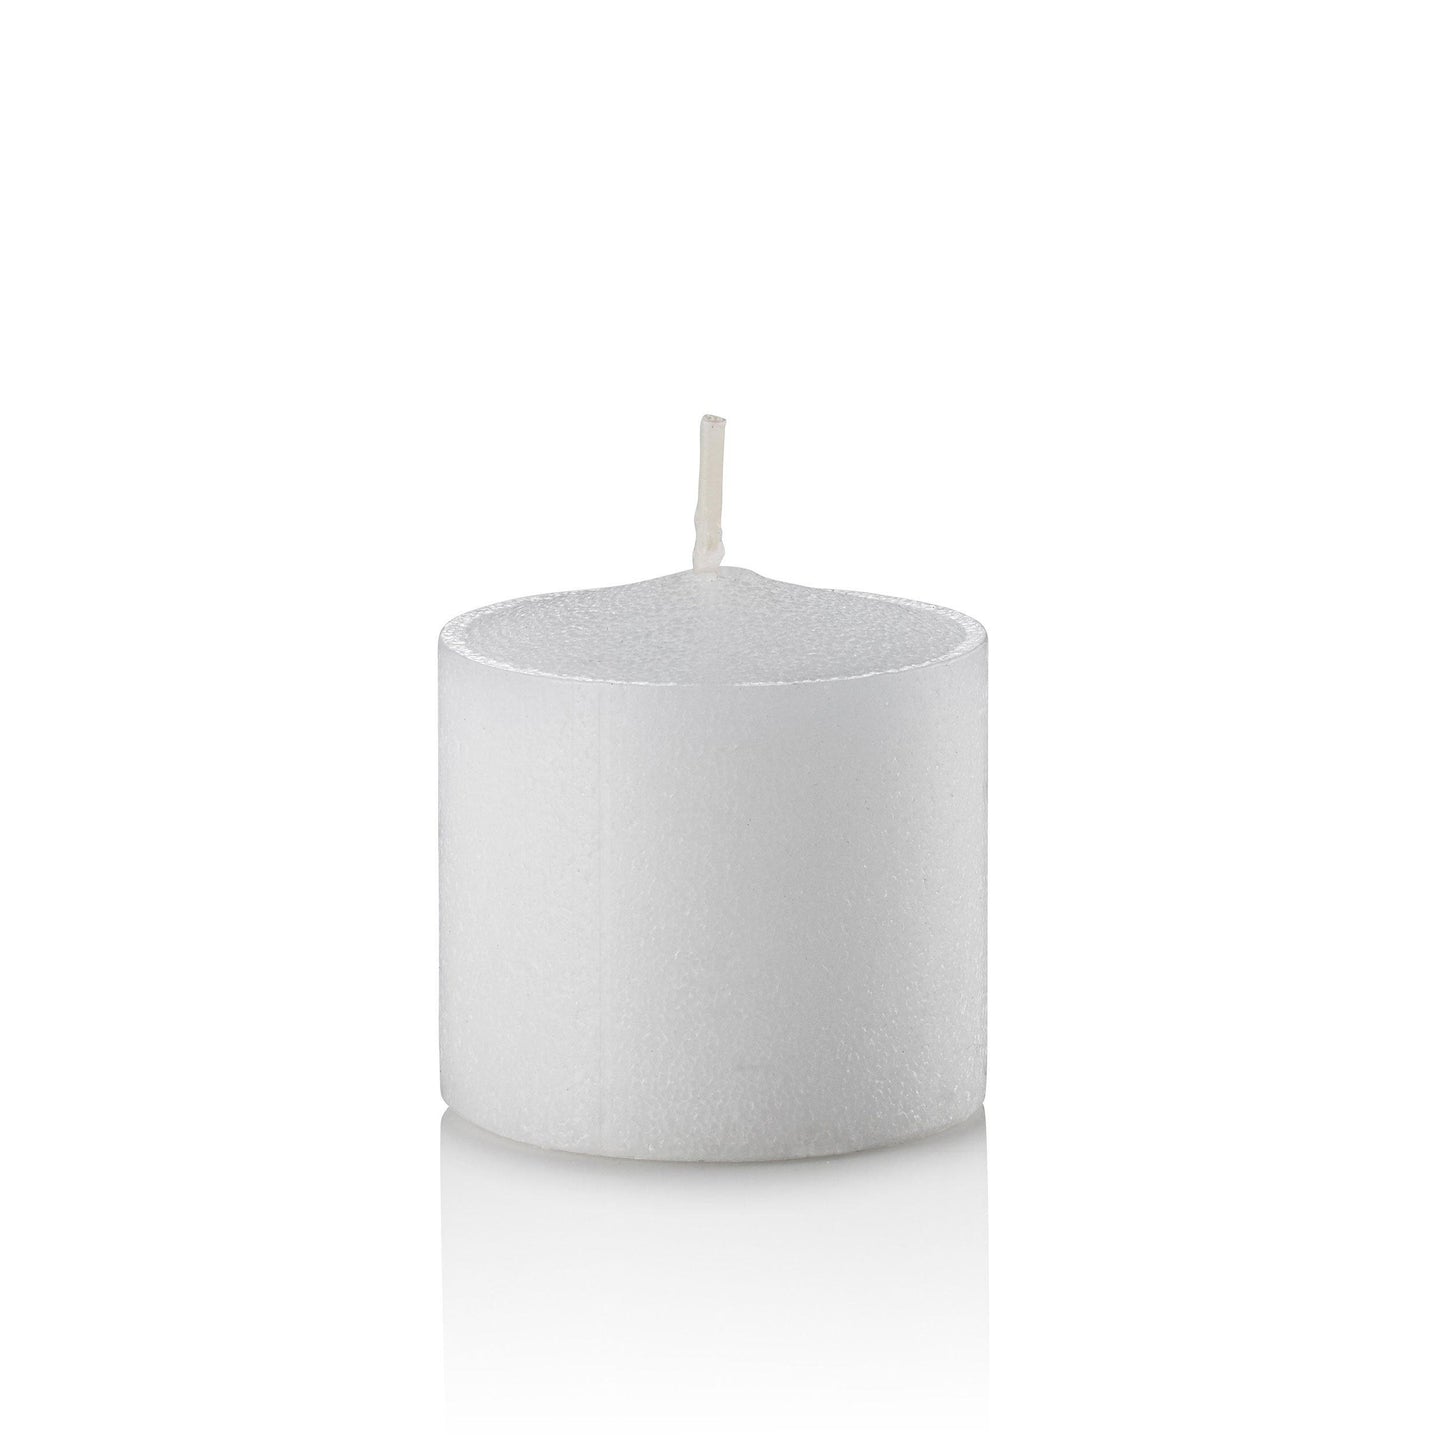 10 Hour Votive Candles, White, Unscented, Set of 432, 3 Gross-votive candles-TableTopLighting.com